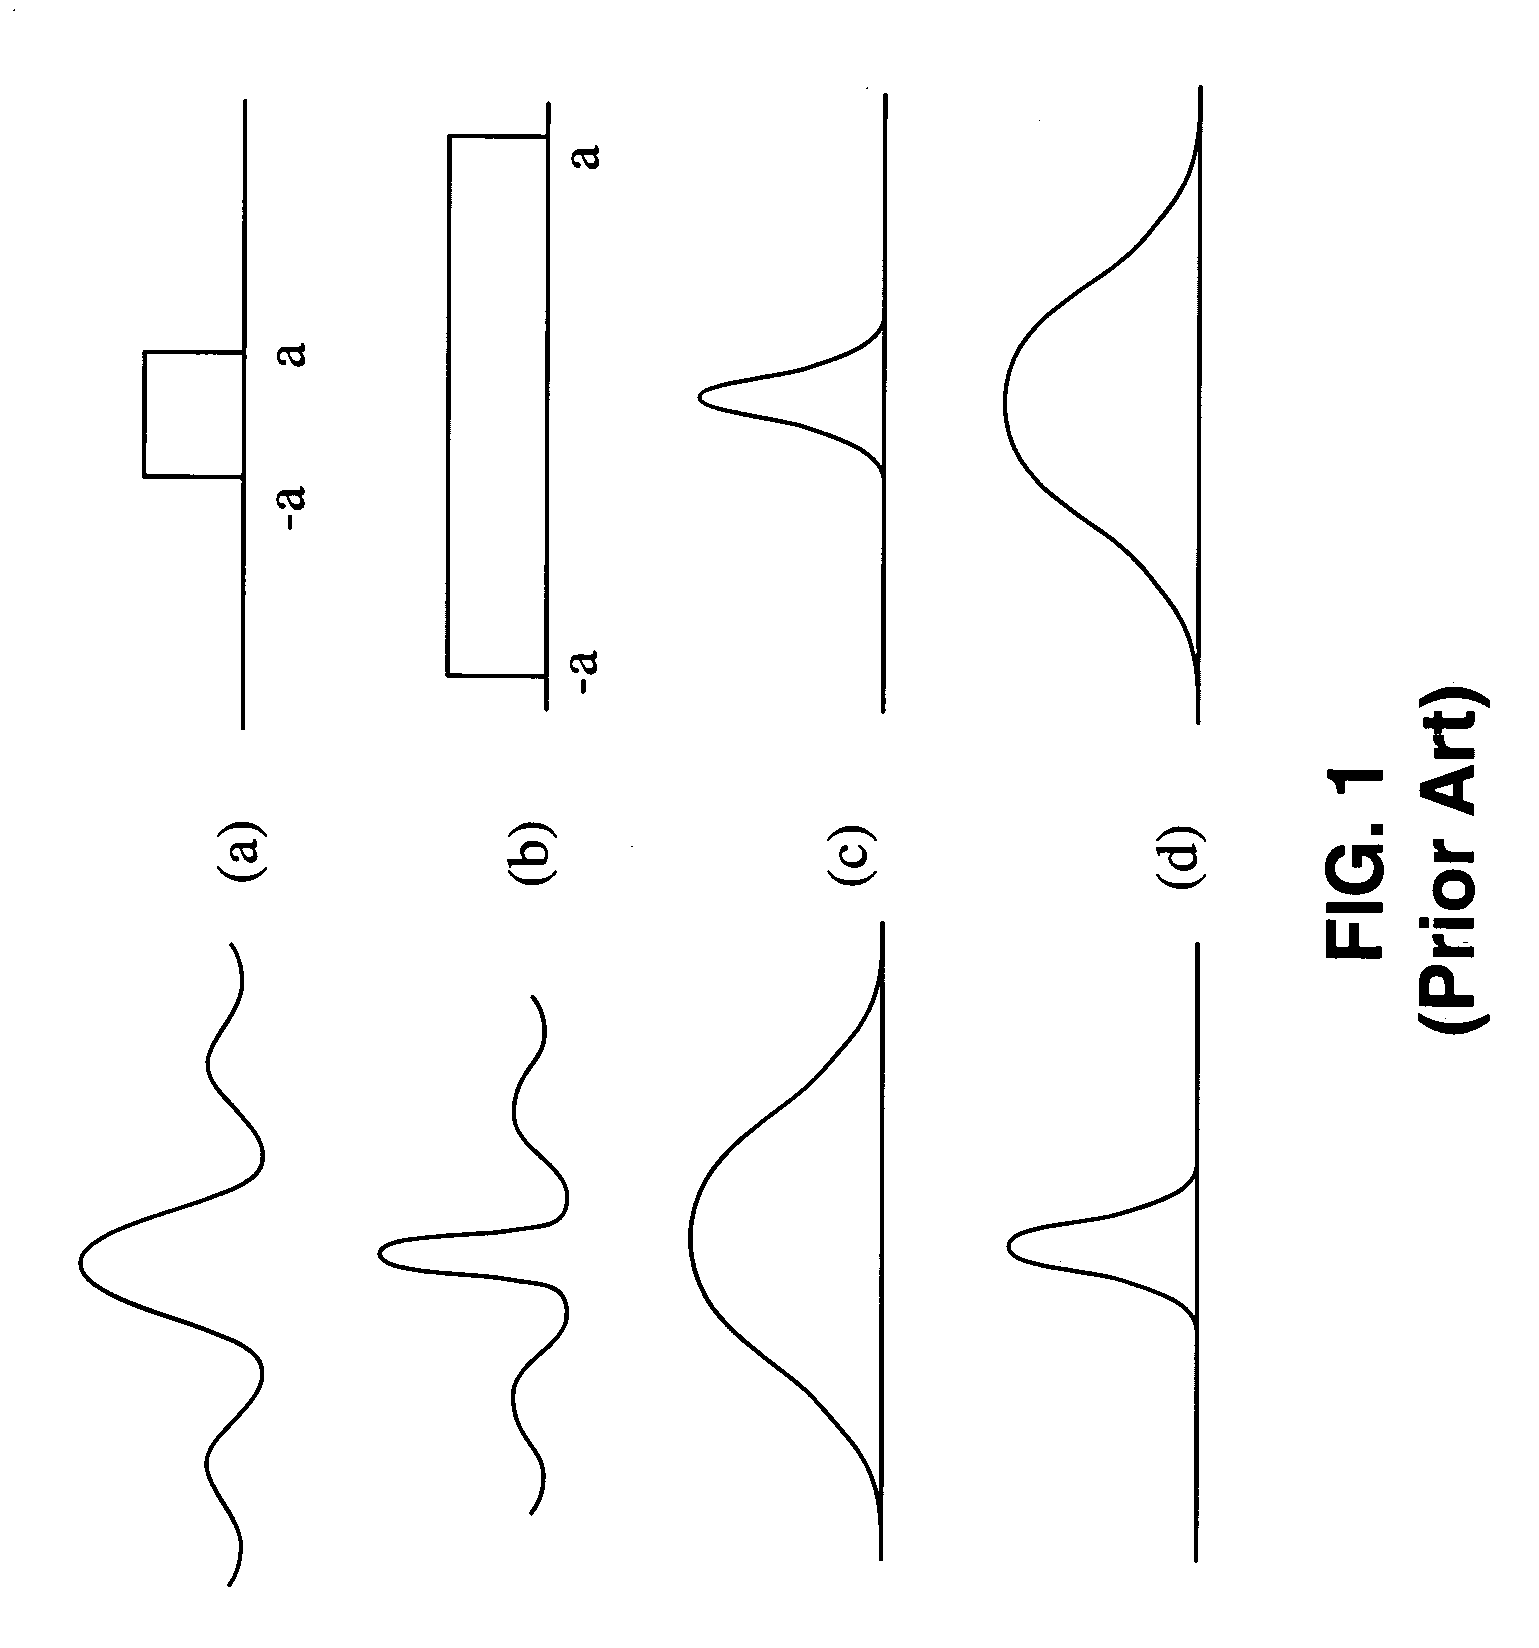 Method and apparatus for transformation of a gaussian laser beam to a far field diffraction pattern